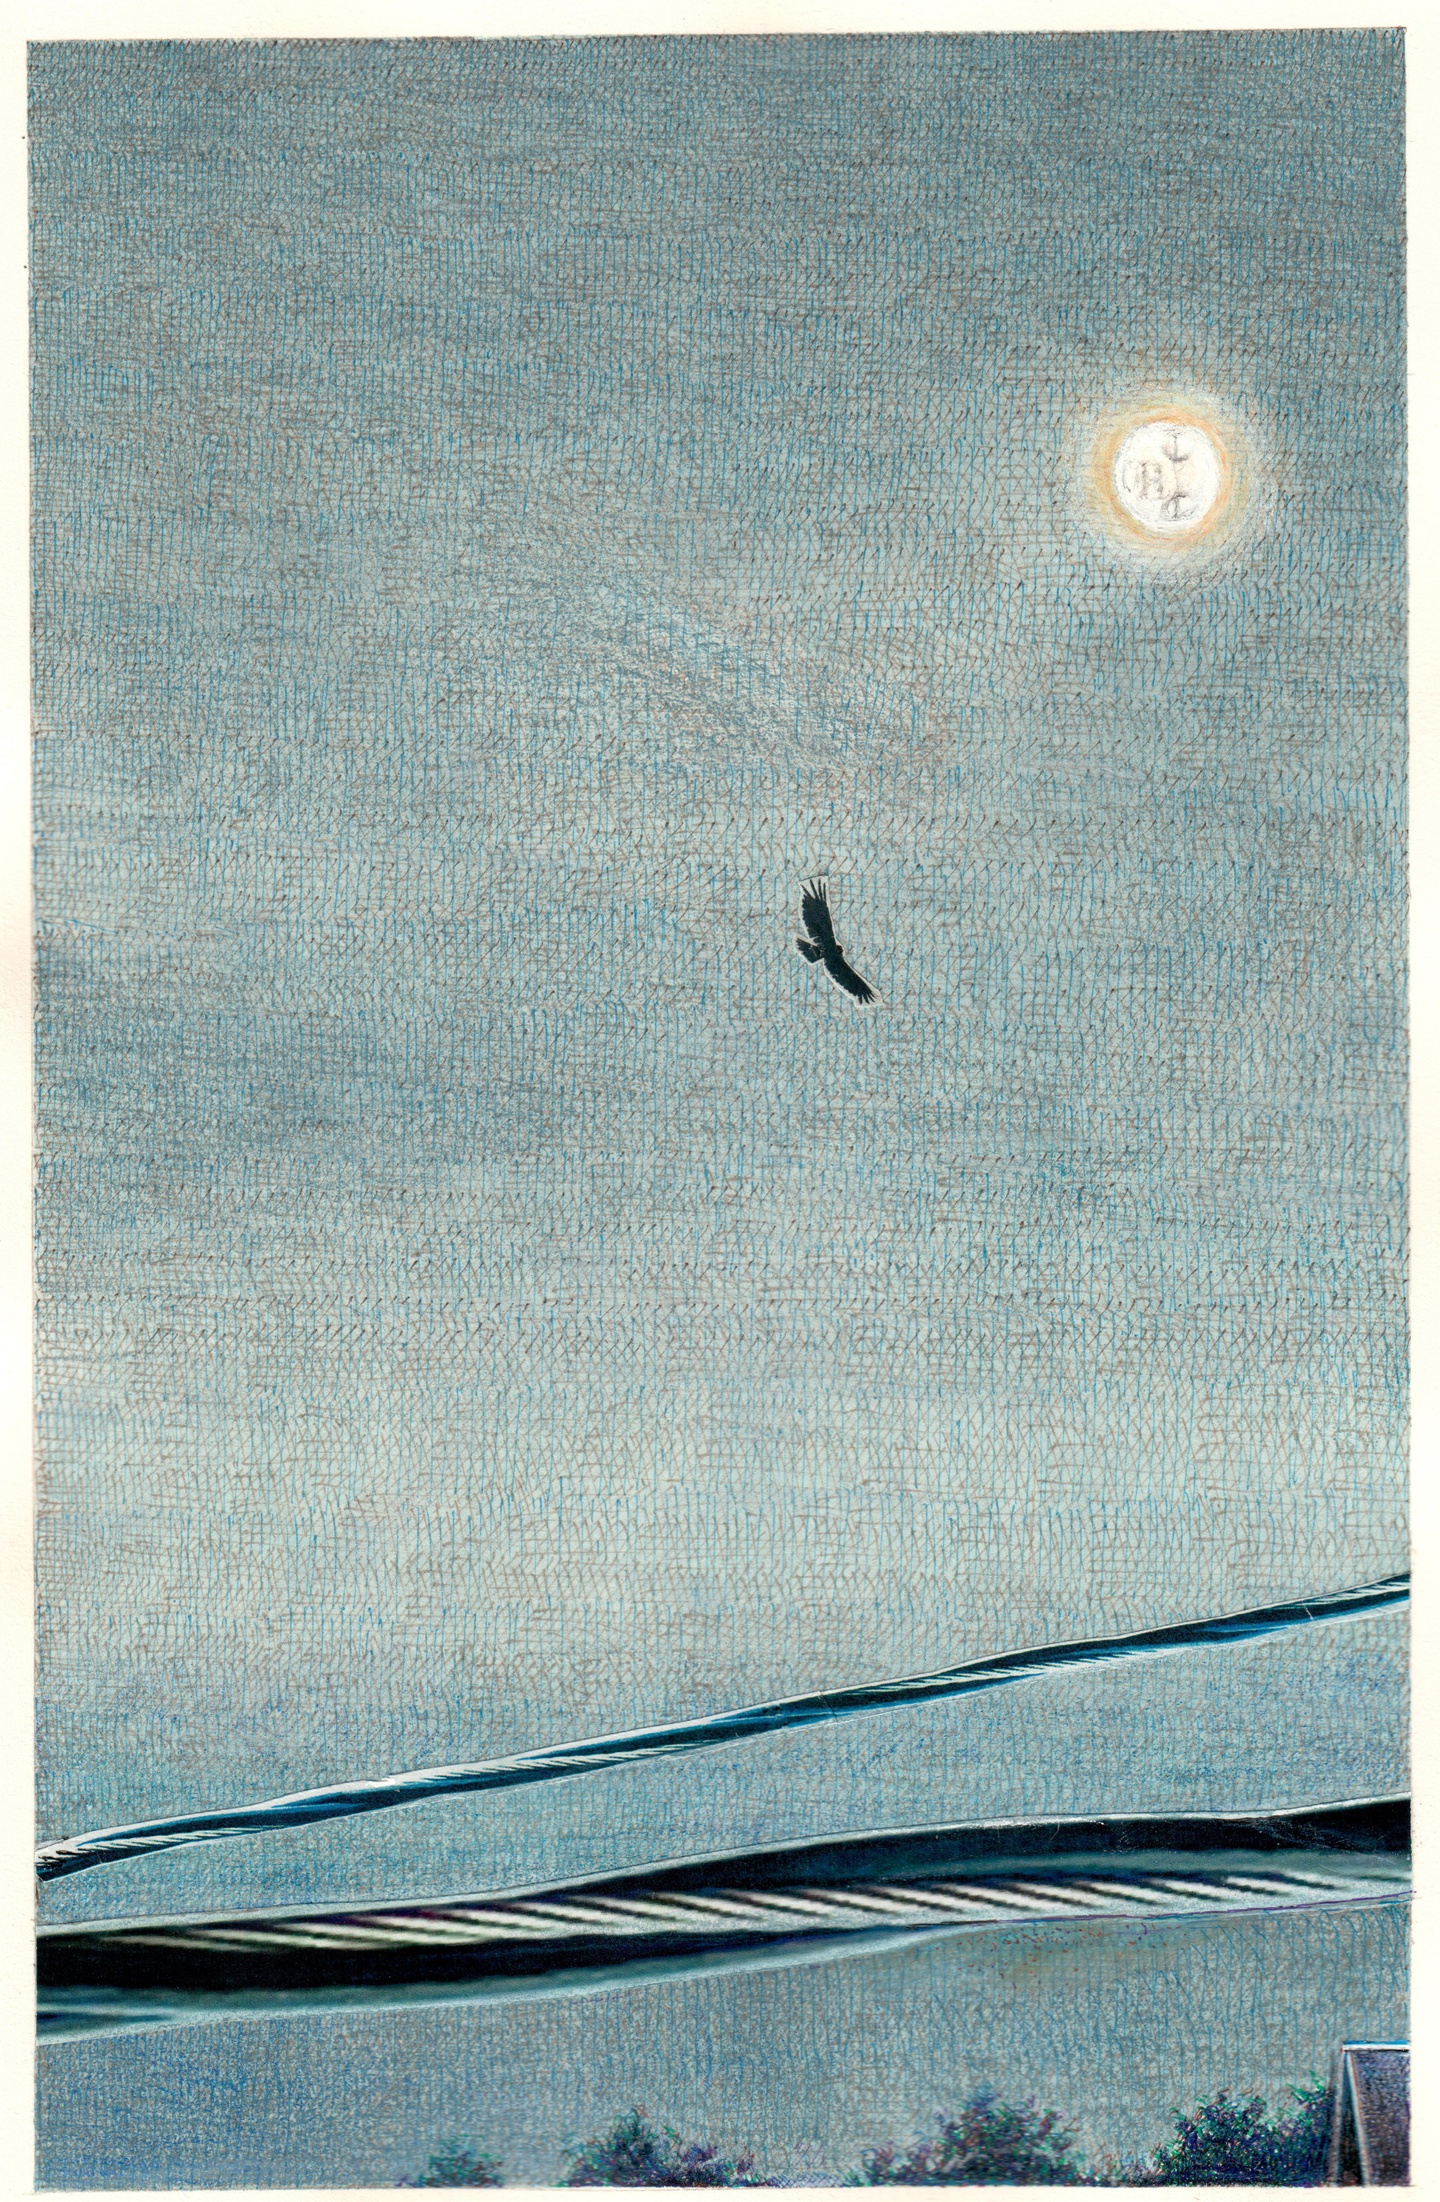 In the broad expanse of sky is a moon (in the upper right, with a face, eyes closed) and a bird soaring across. Below rooftops and trees are just visible; two wisps of rope (or smoke/fog perhaps) stretch across the composition in the foreground.